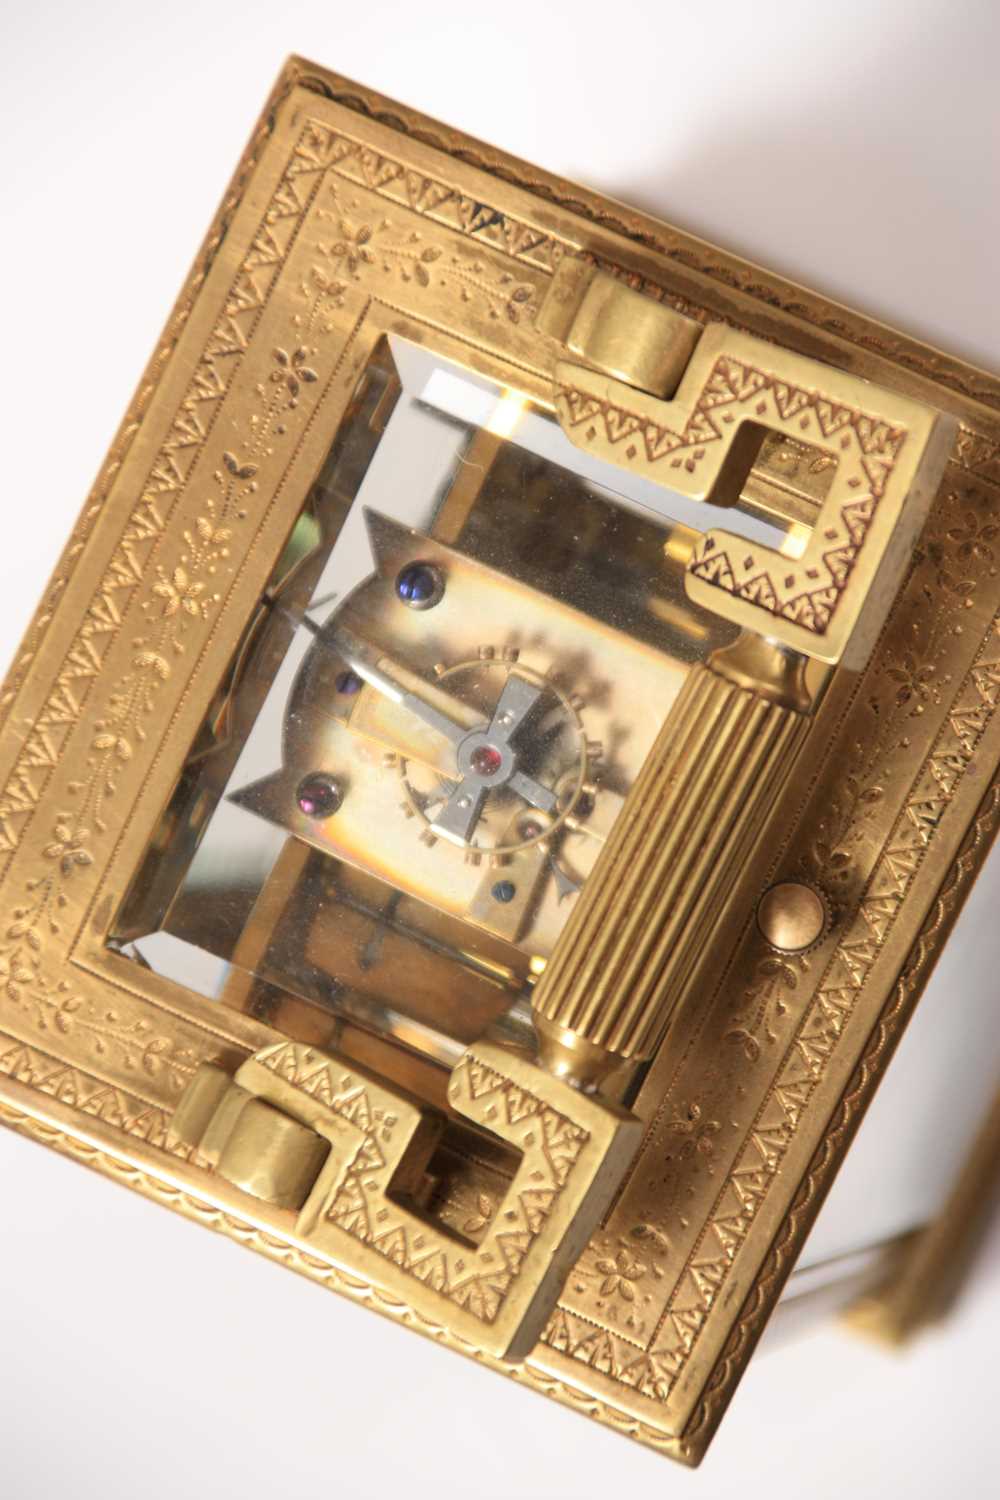 A LATE 19TH CENTURY FRENCH ENGRAVED BRASS REPEATING CARRAIGE CLOCK WITH ALARM - Image 9 of 10